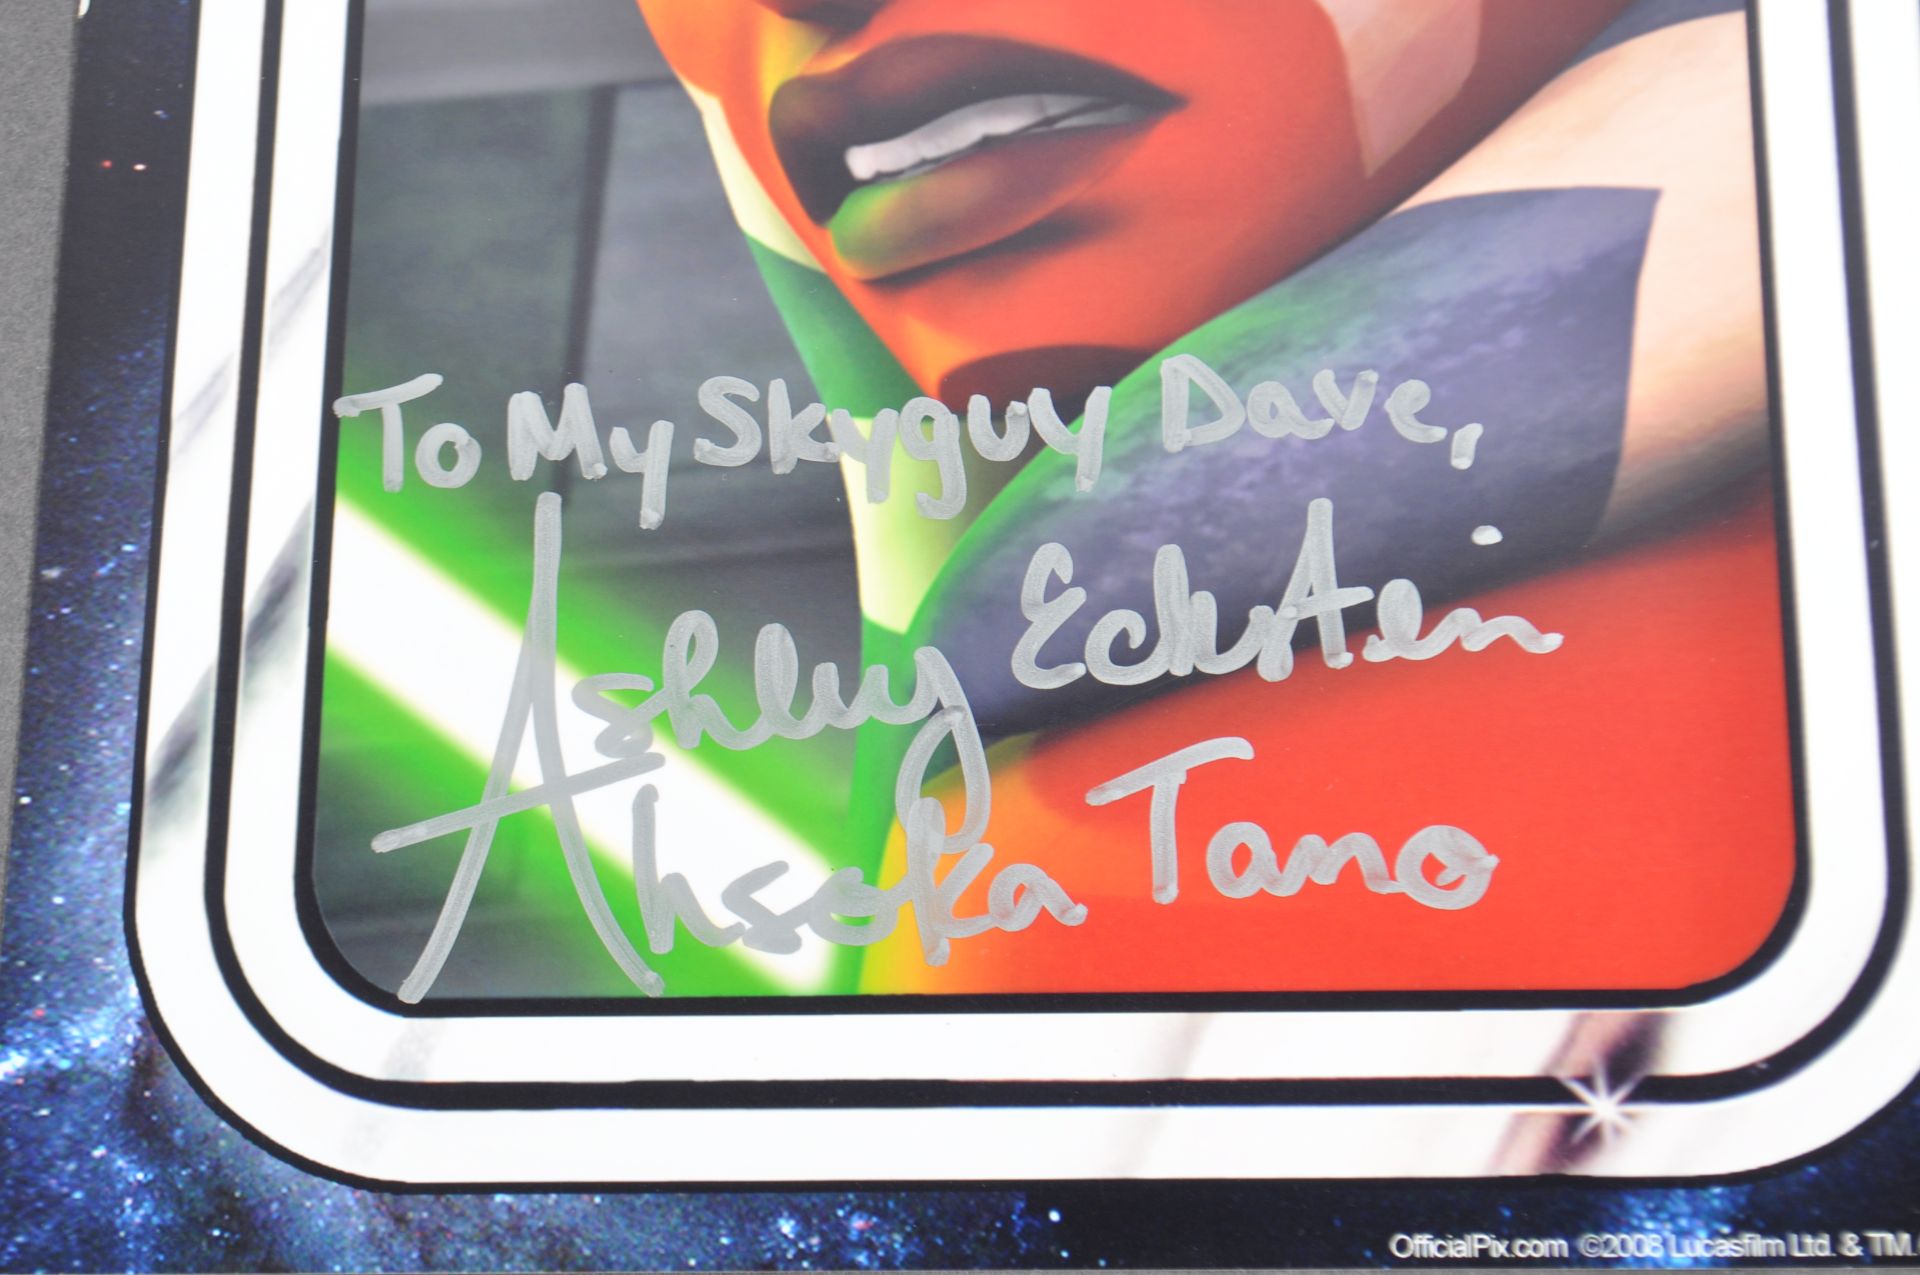 ESTATE OF DAVE PROWSE - STAR WARS - ASHLEY ECKSTEIN SIGNED PHOTOS - Image 2 of 3